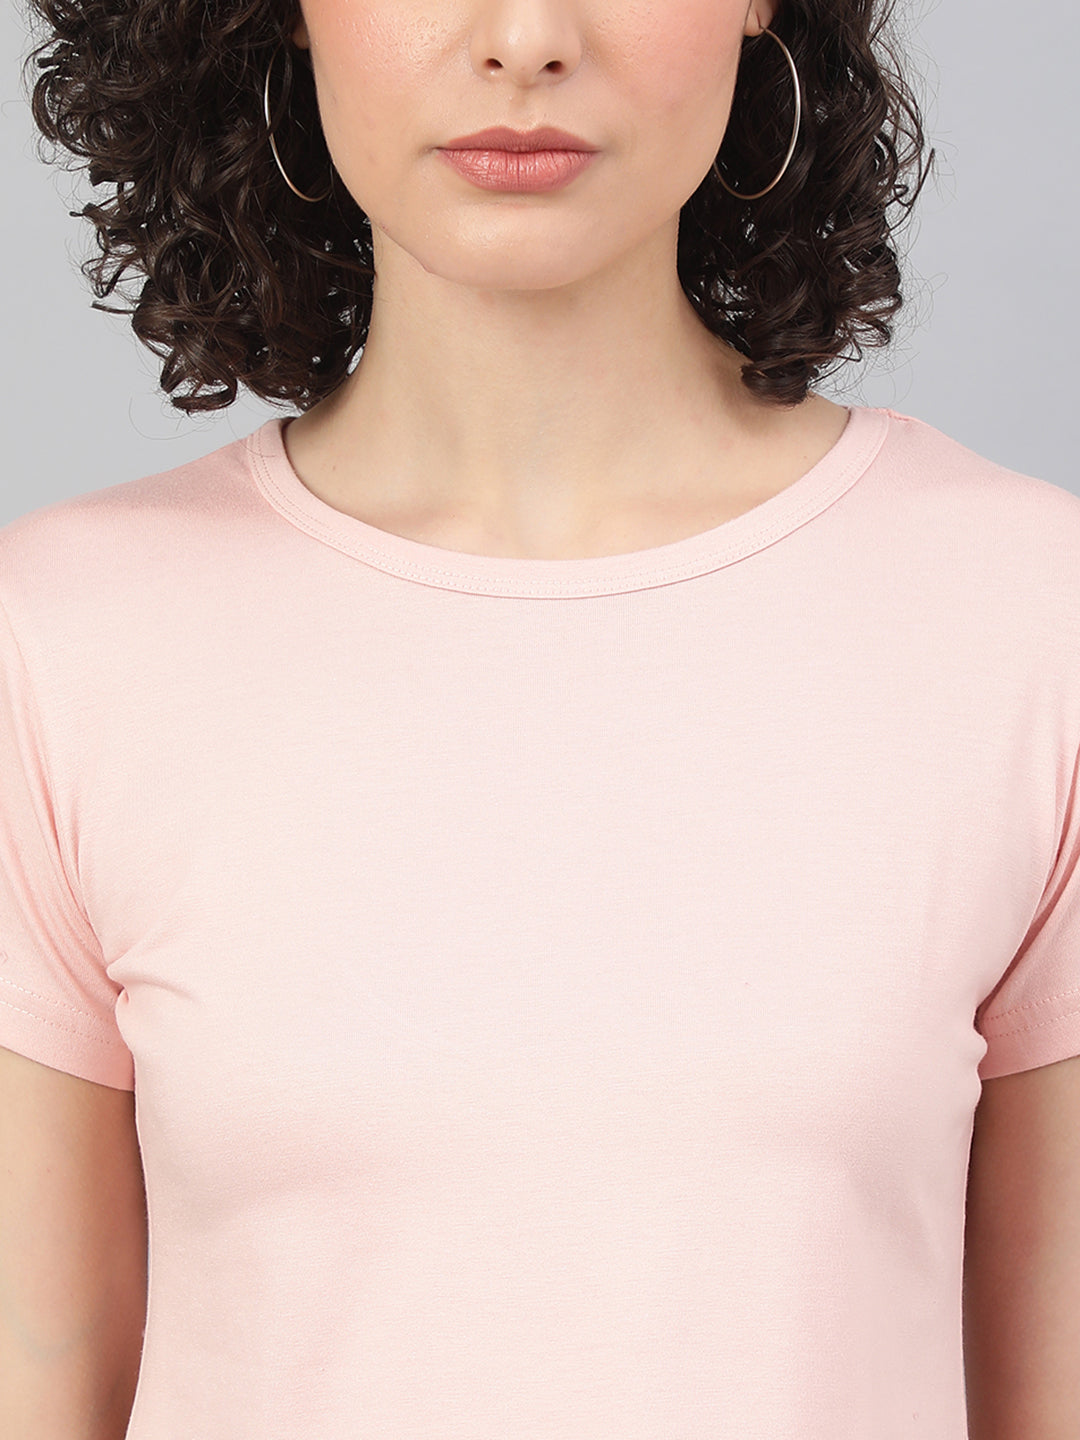 Supima Cotton Pink Color T-shirts for women - BeSimple